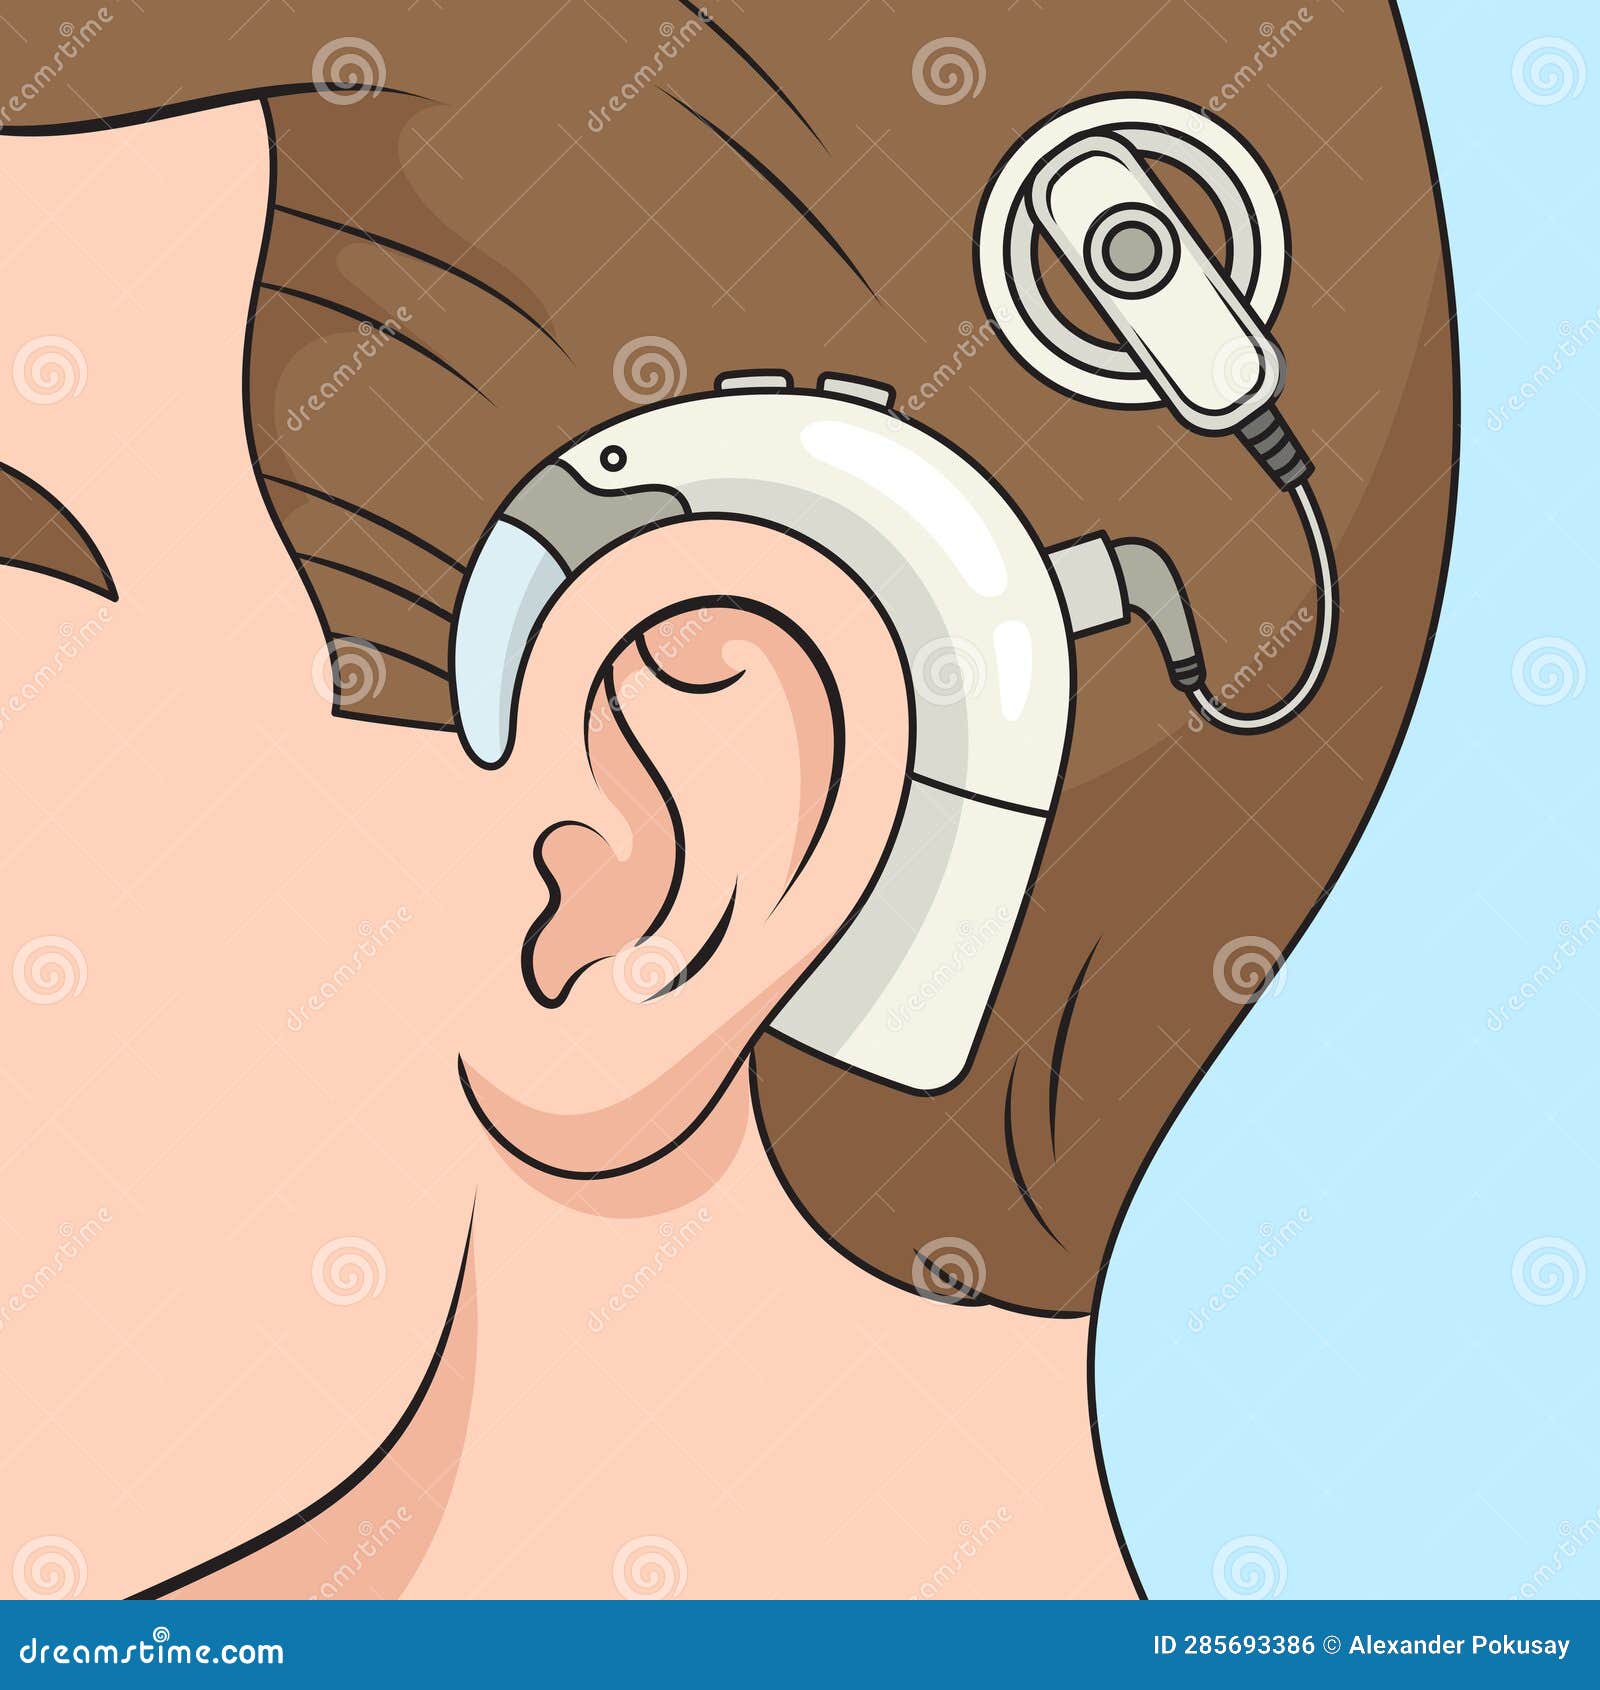 cochlear implant diagram medical science